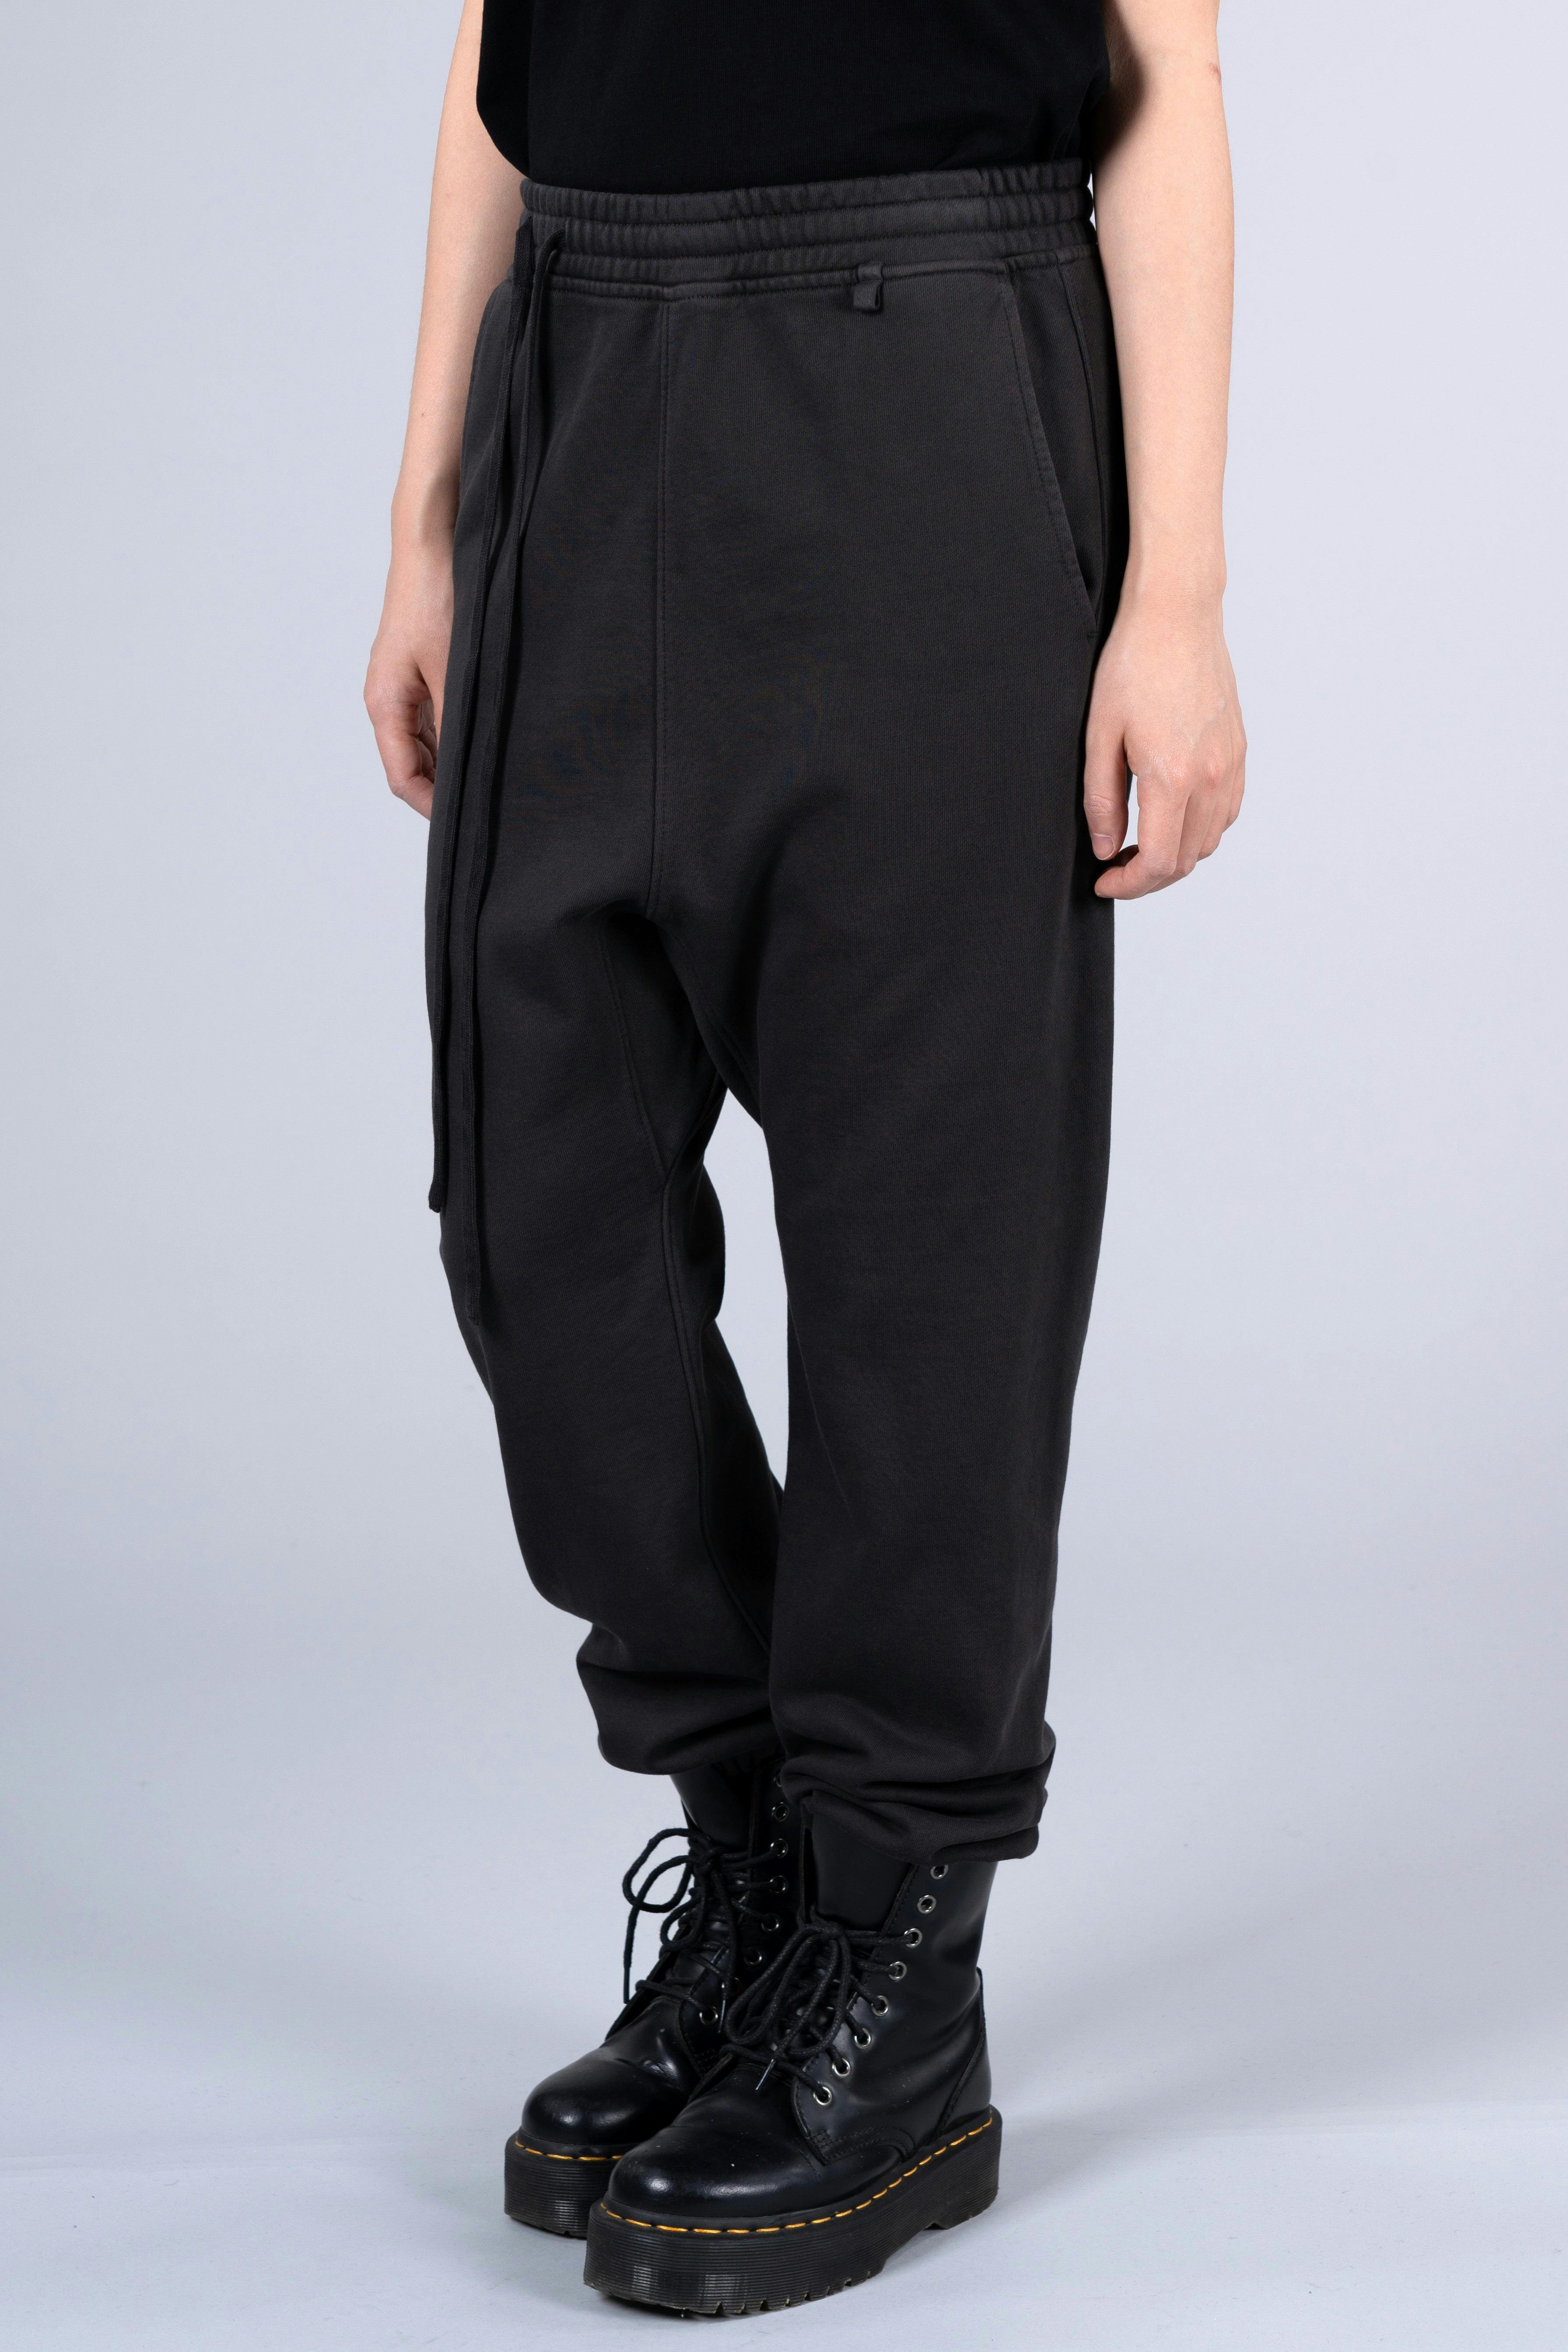 ˝CHAOS˝ Washed Sweatpants - Washed Charcoal